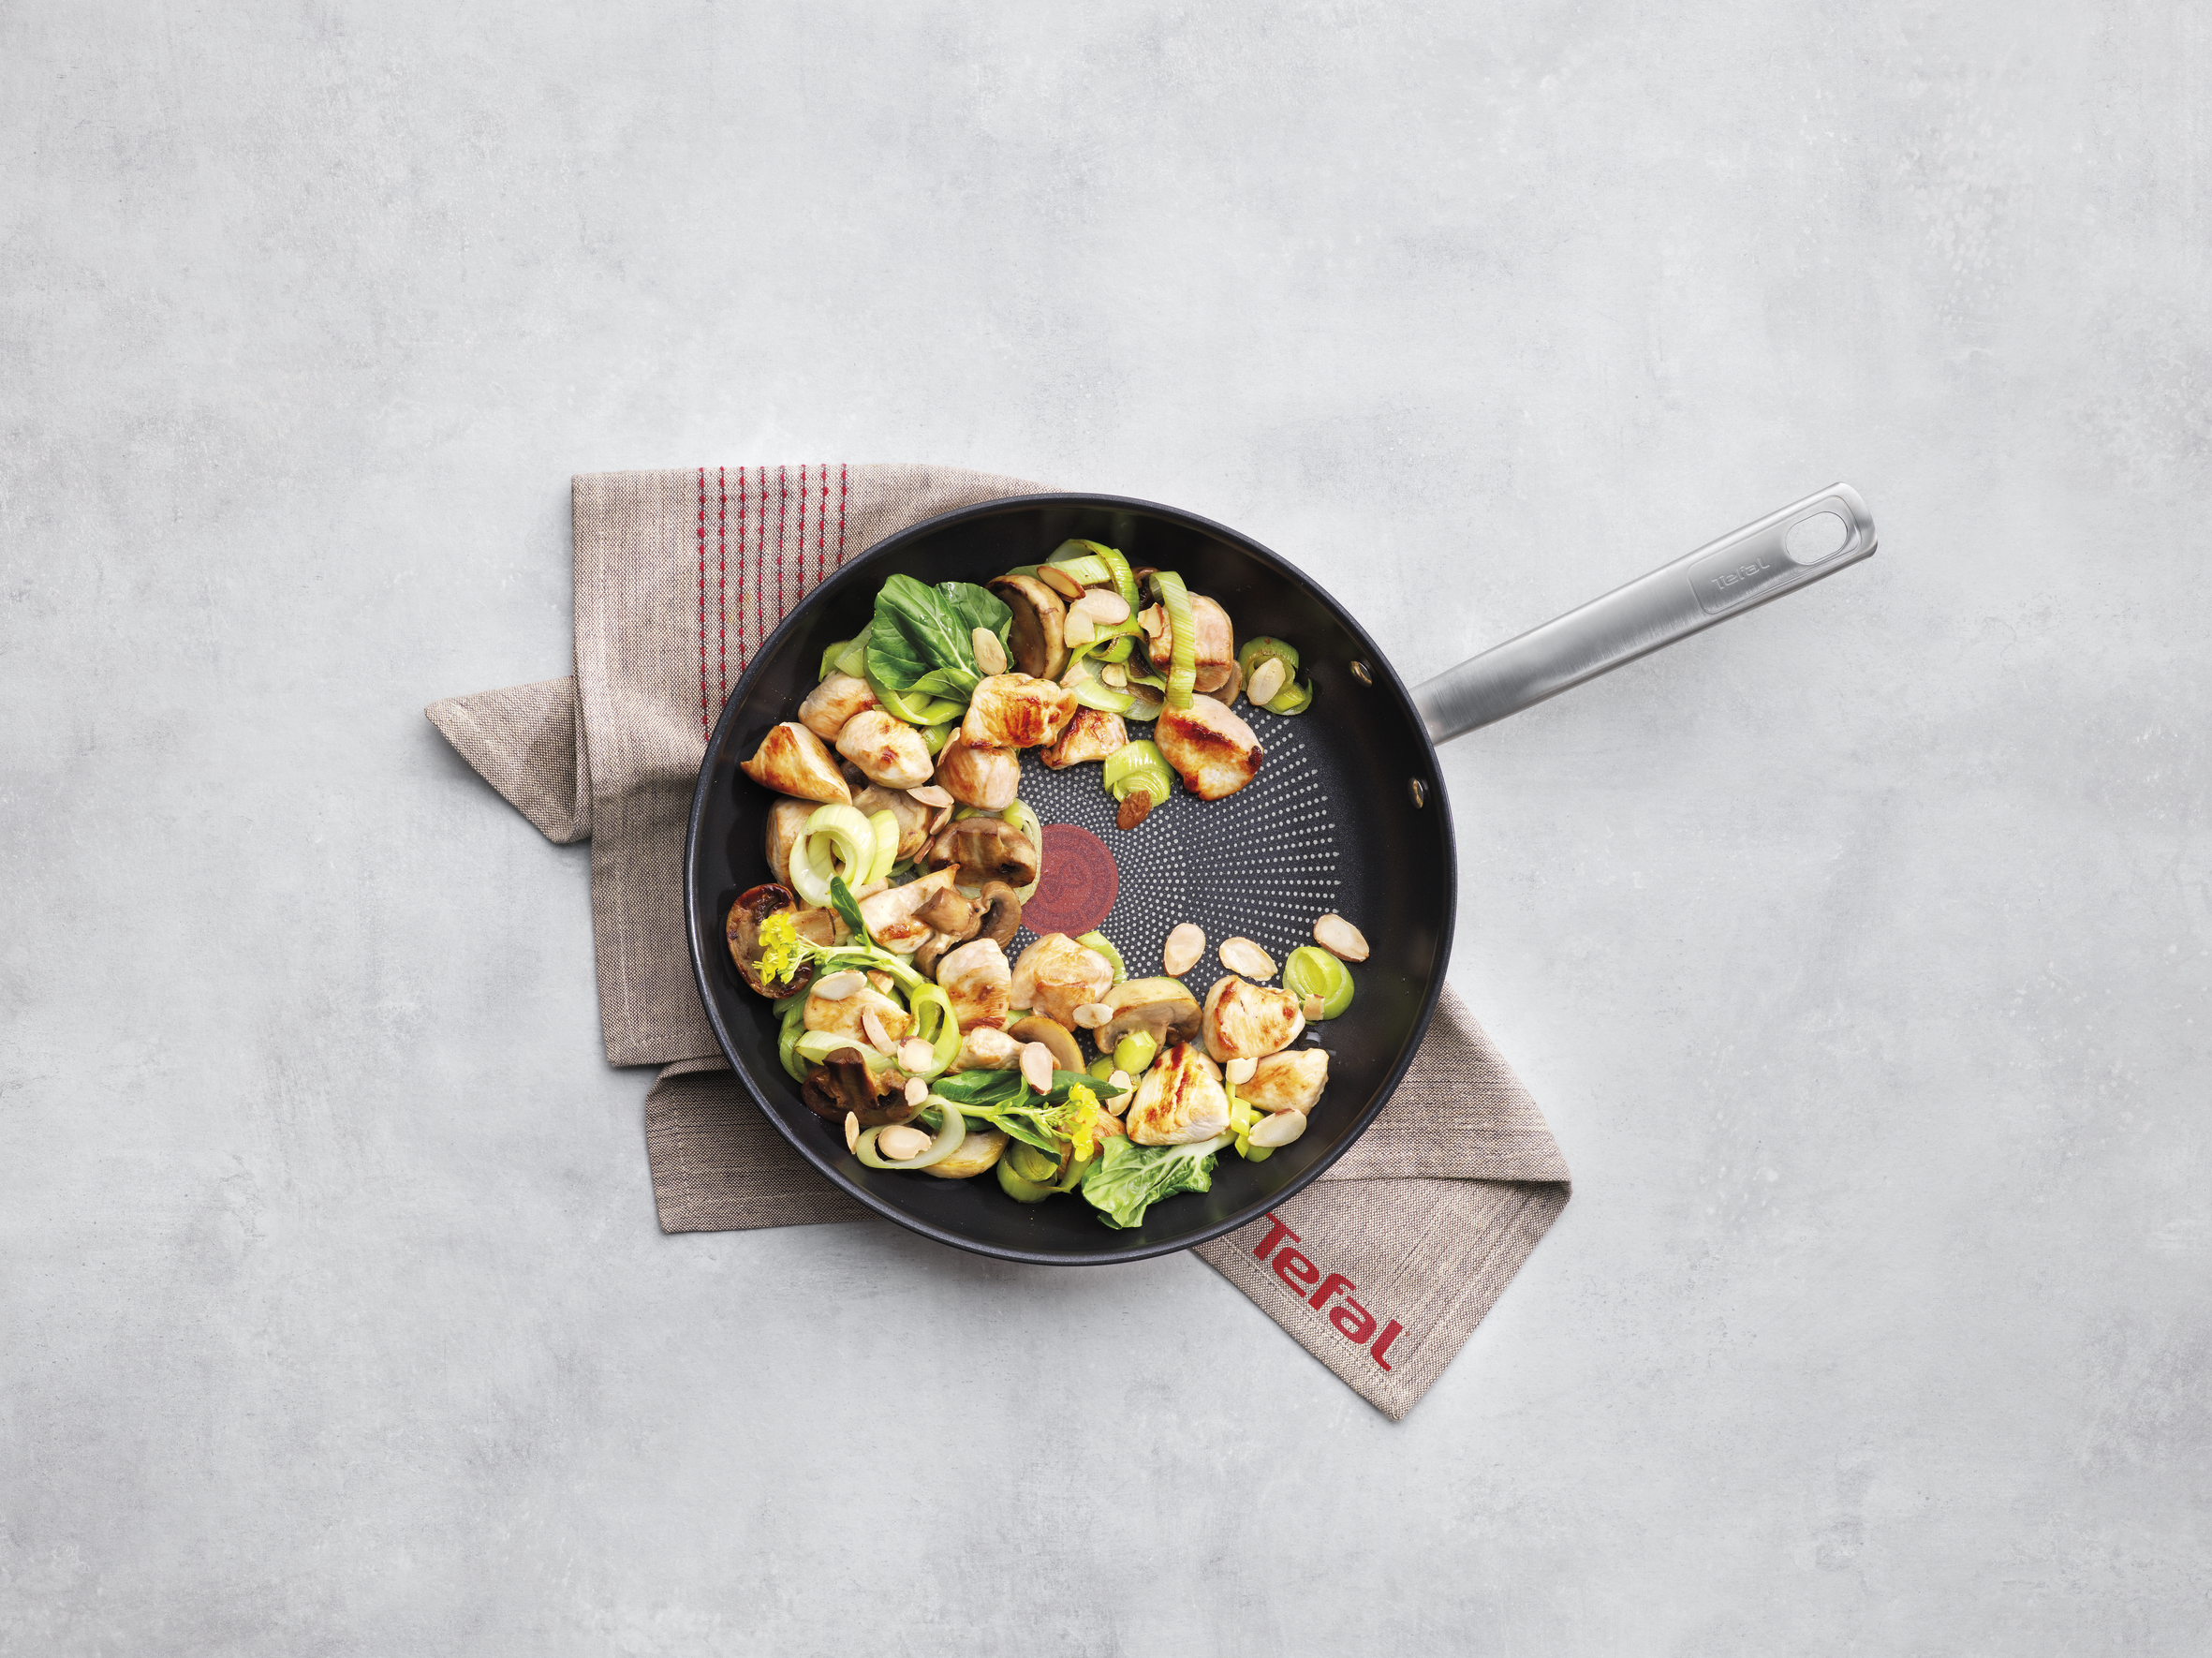 Tefal Virtuoso Stainless Steel Induction Frypan 28cm